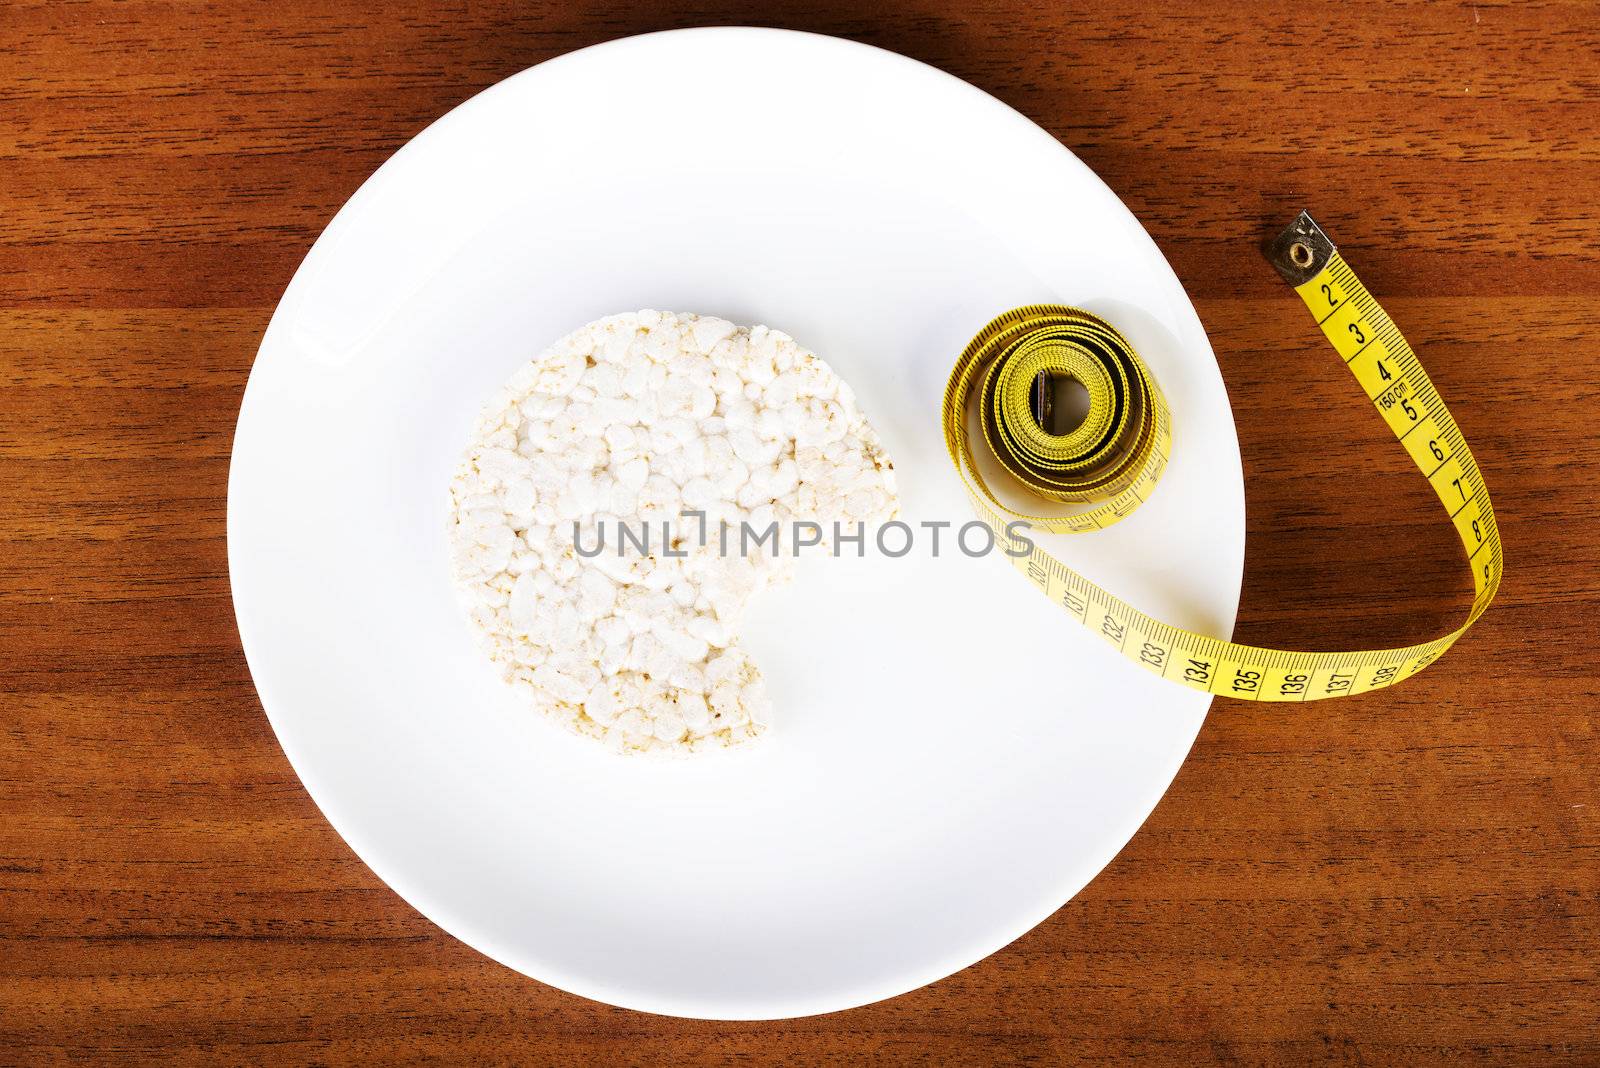 Diet concept. Biten rice cake on plate next to measuring tape.